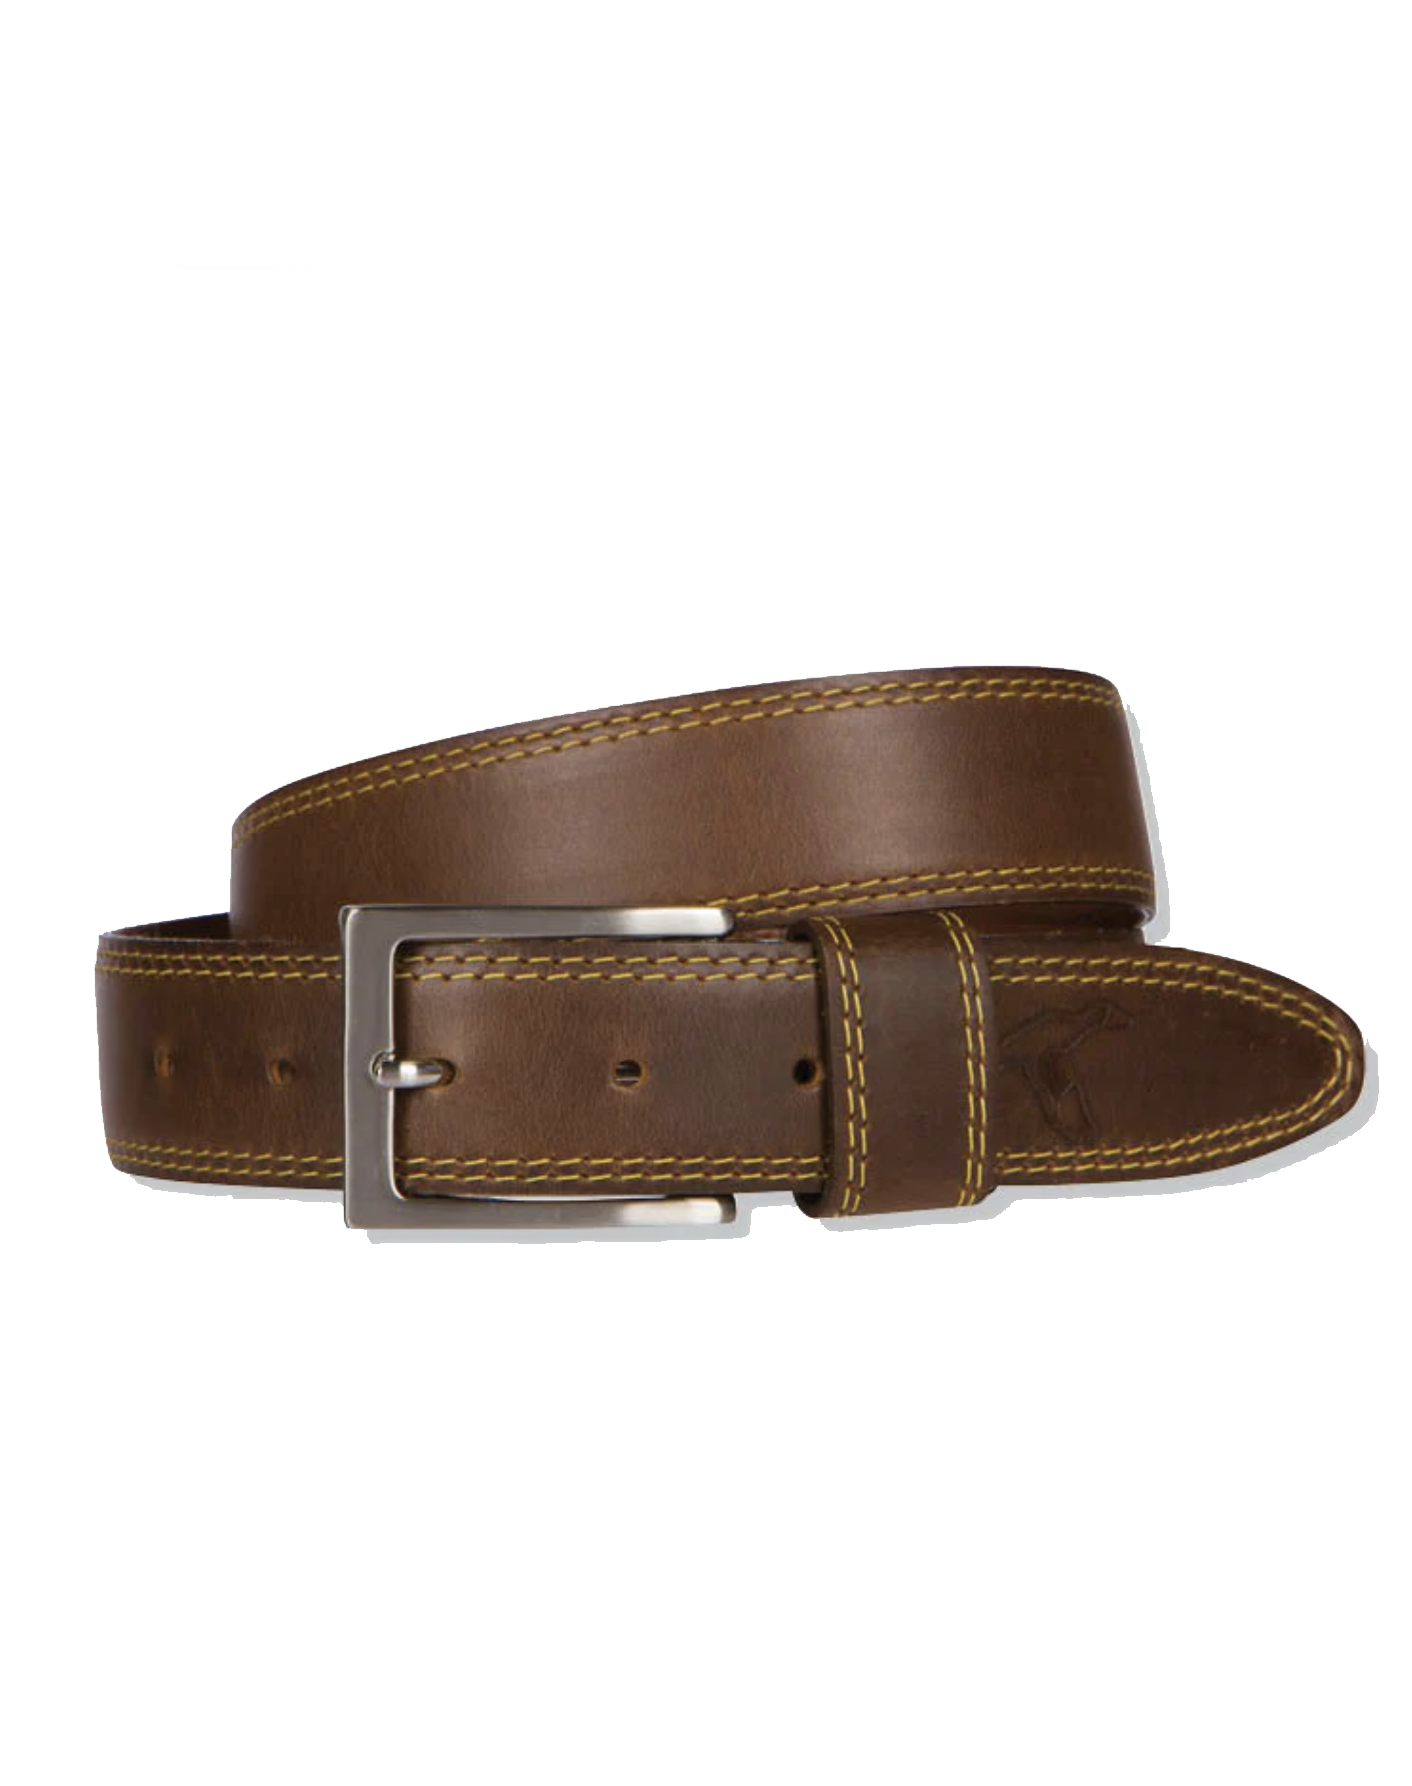 Genteal Leather Belt Old Town